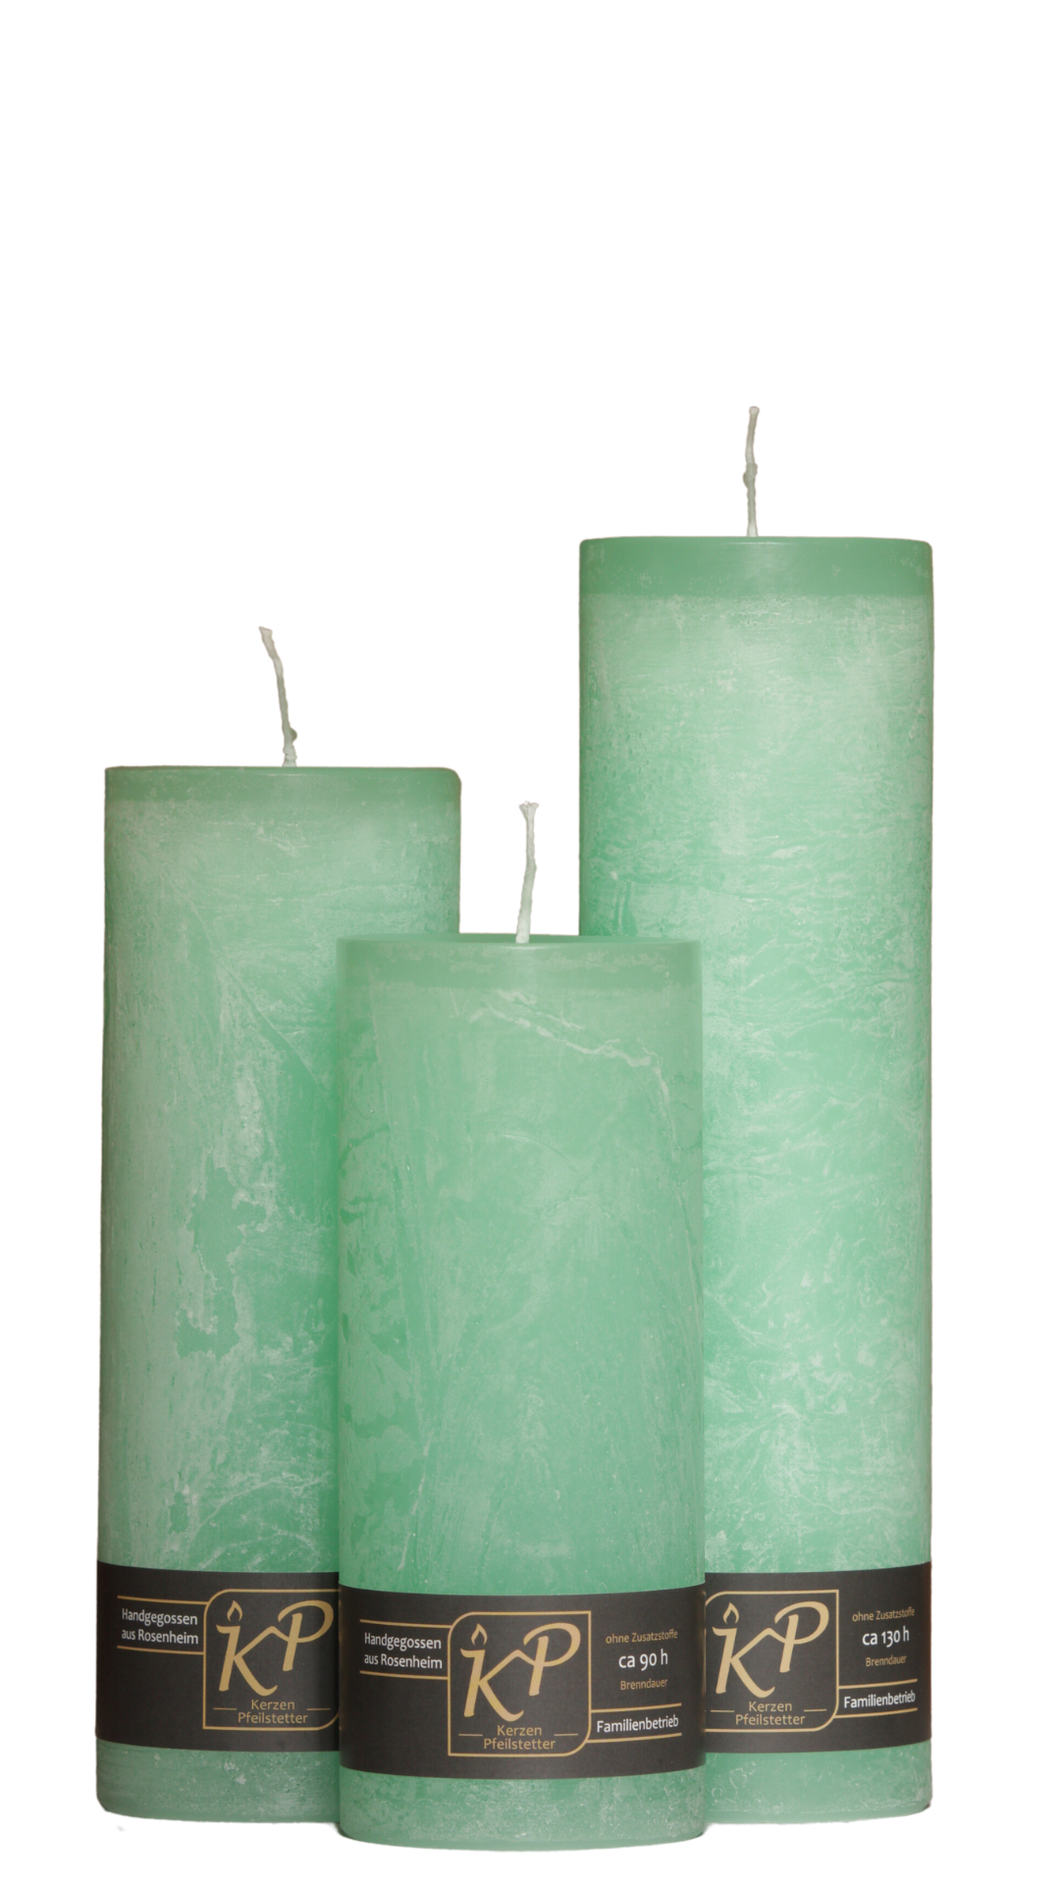 Dalina flower candle | apple green | ~ 130h burning time